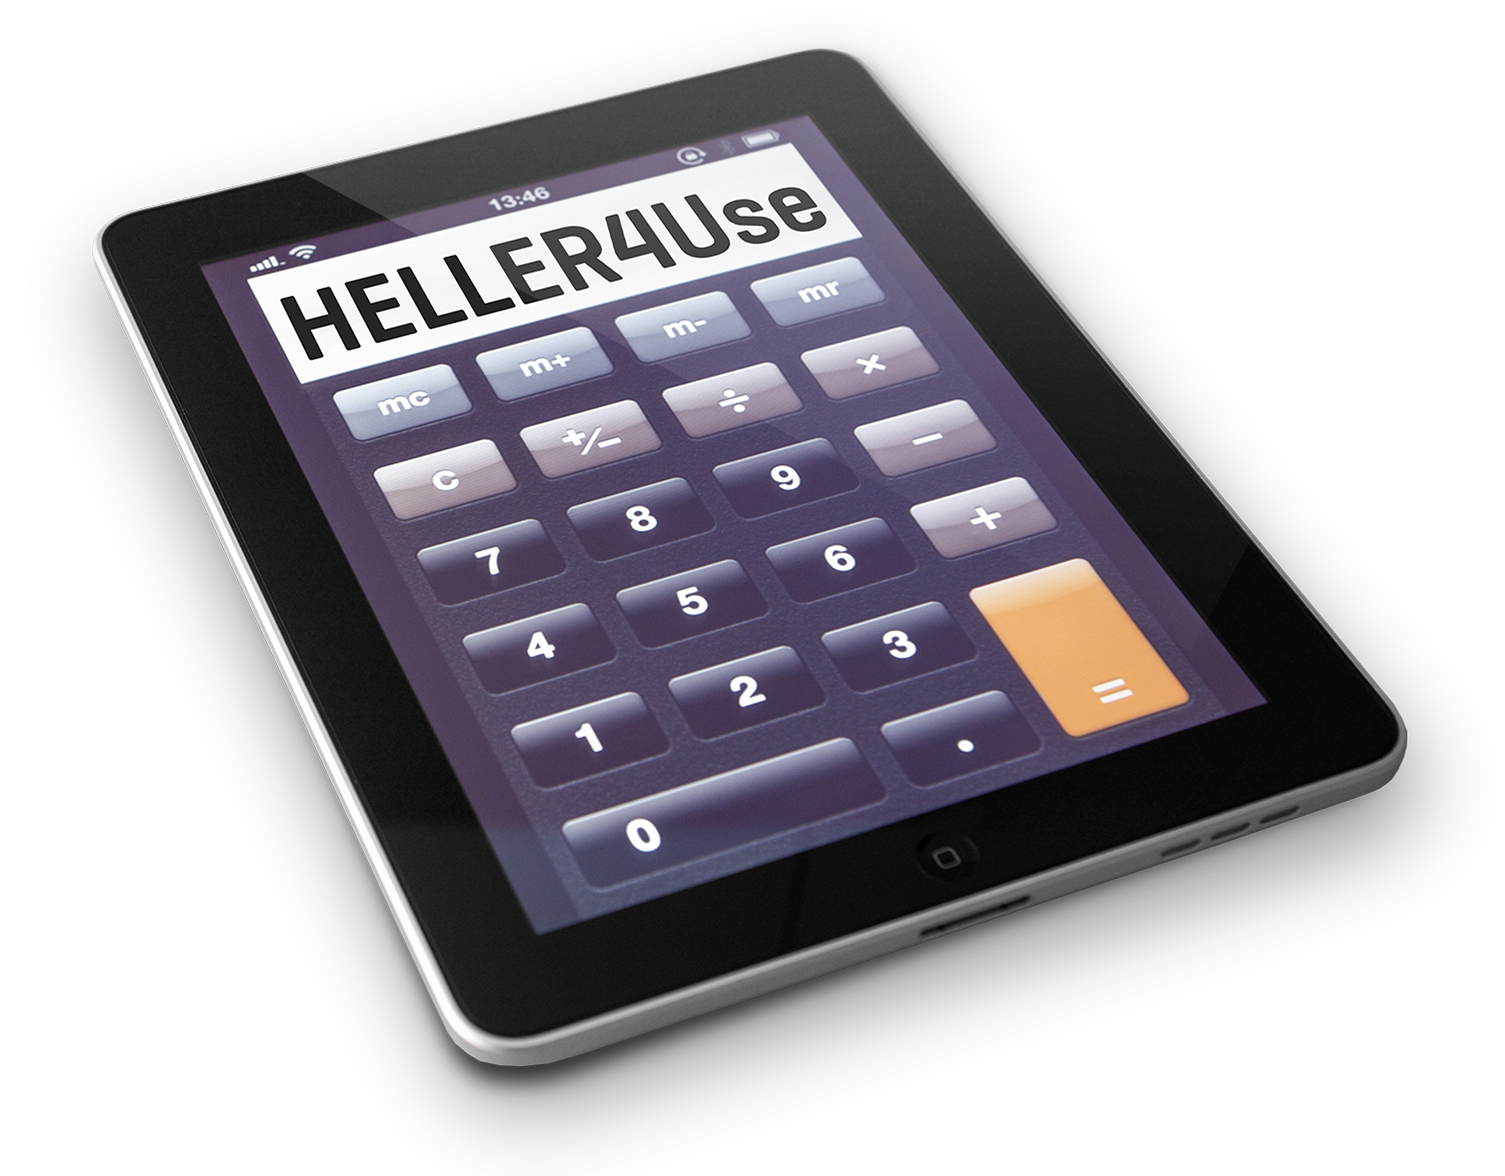 HELLER4Use: Full flexibility, transparency and cost control